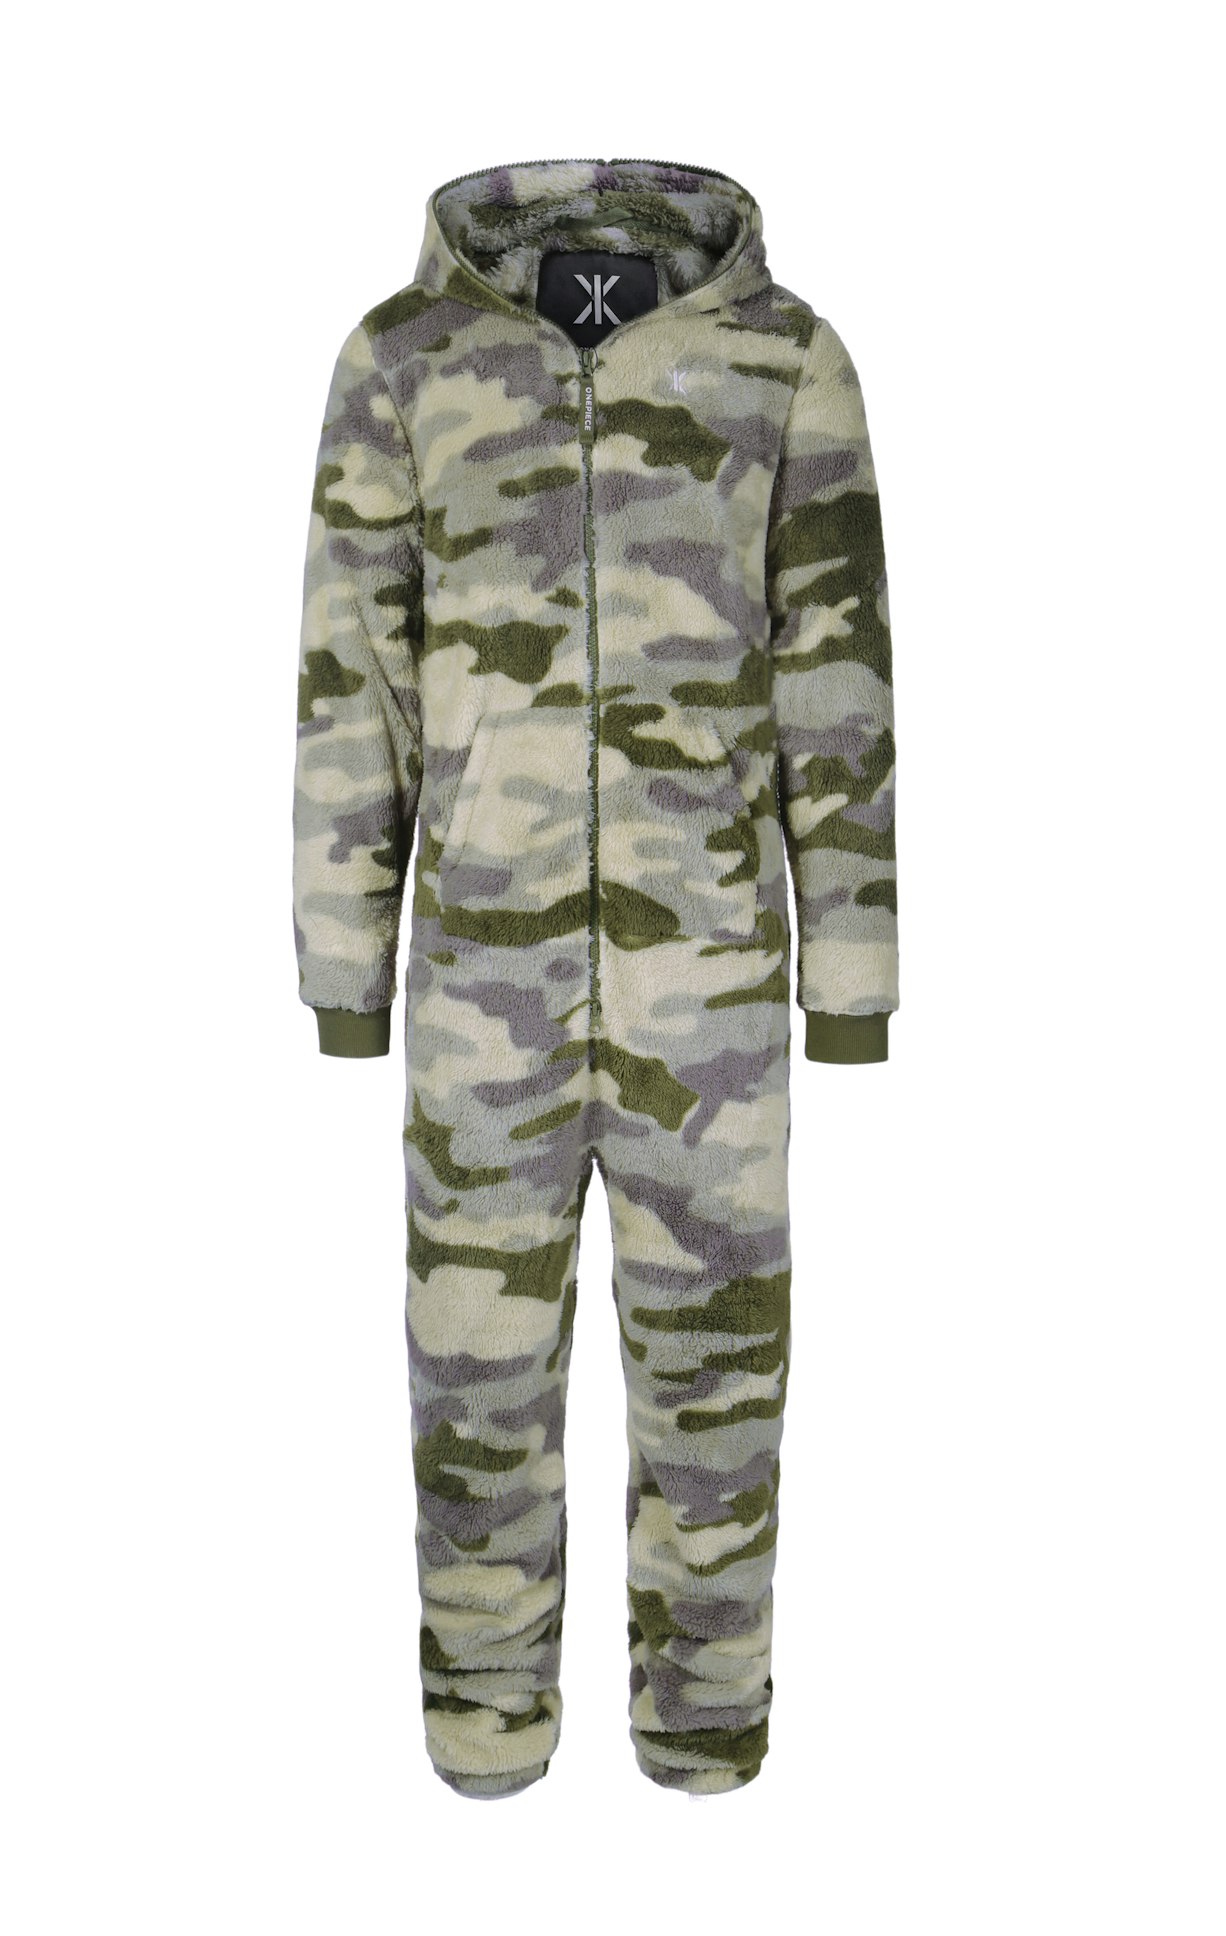 Puppy Jumpsuit Army Camo